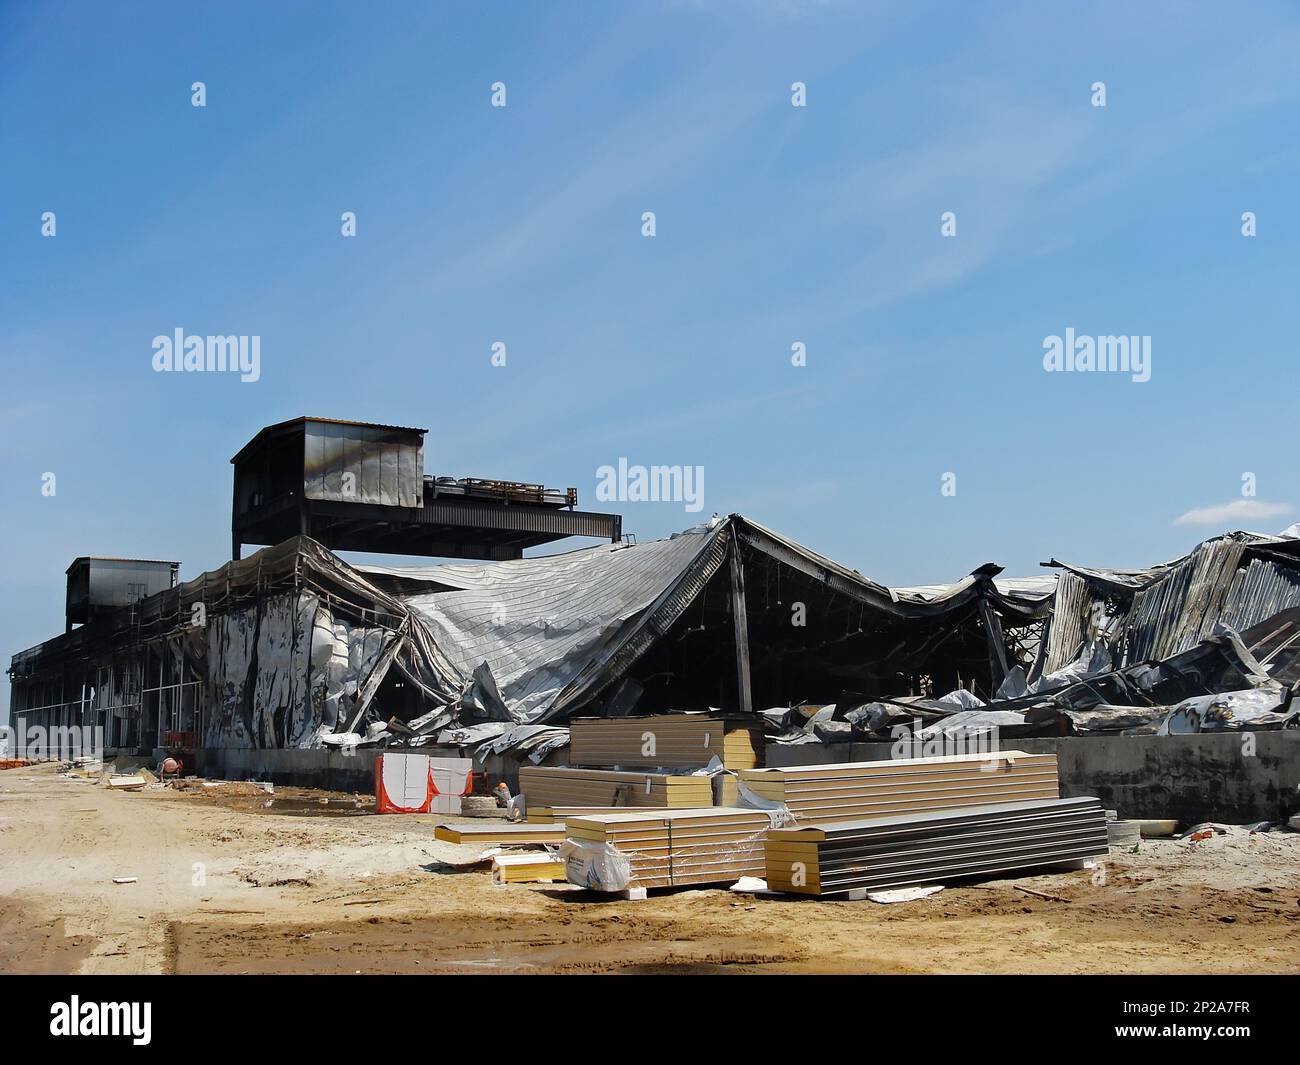 Consequences of a warehouse fire. The metal structure building collapsed from the fire, the columns and walls were burnt. Stock Photo